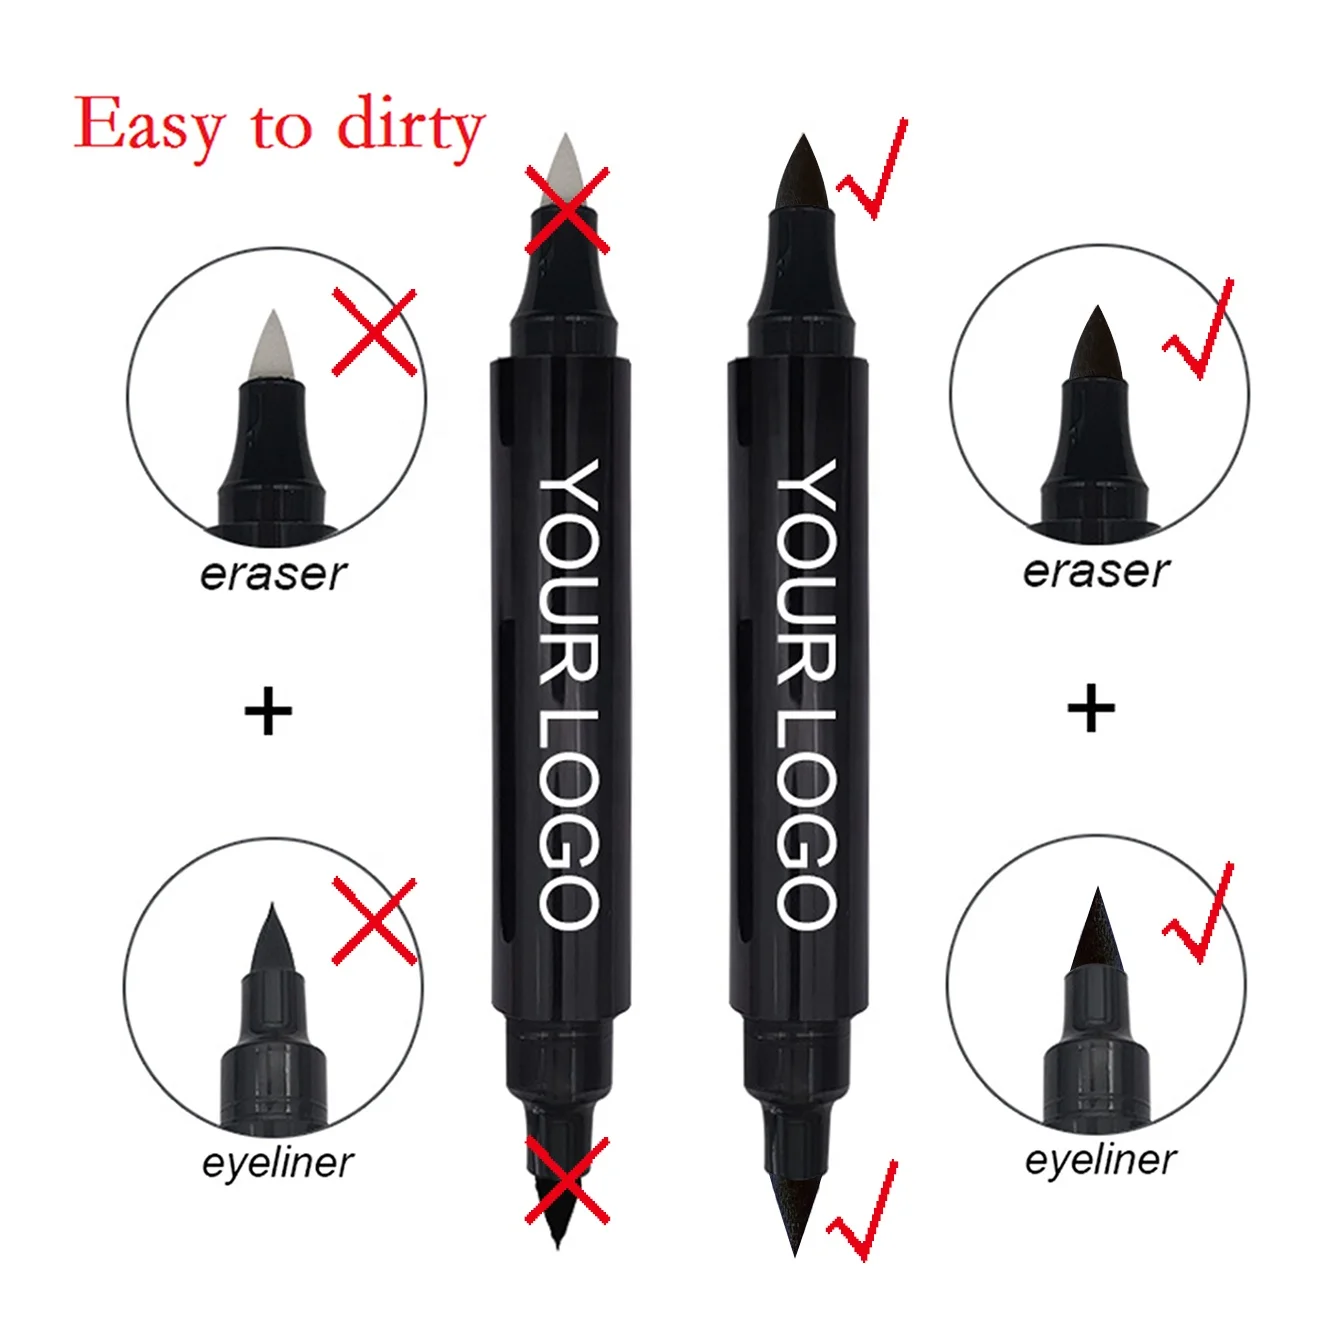 

100% authentic vegan no logo private label eyeliner double head 2 in 1 winged eyeliner stamp pencil with eraser